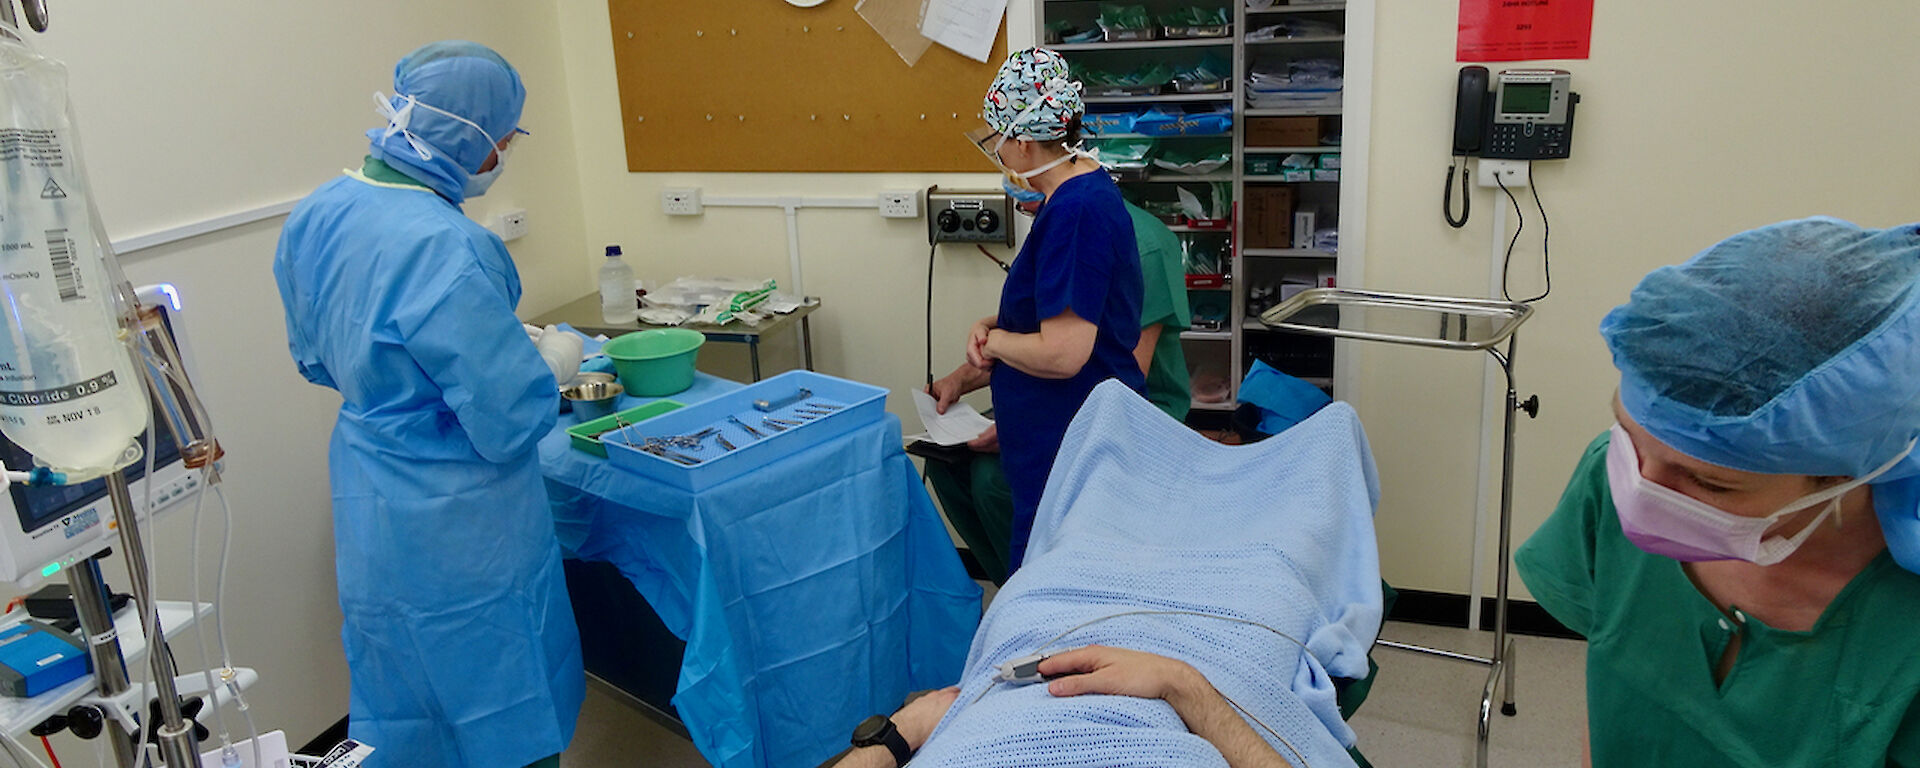 The Macca medical team getting ready to perform a mock surgery.